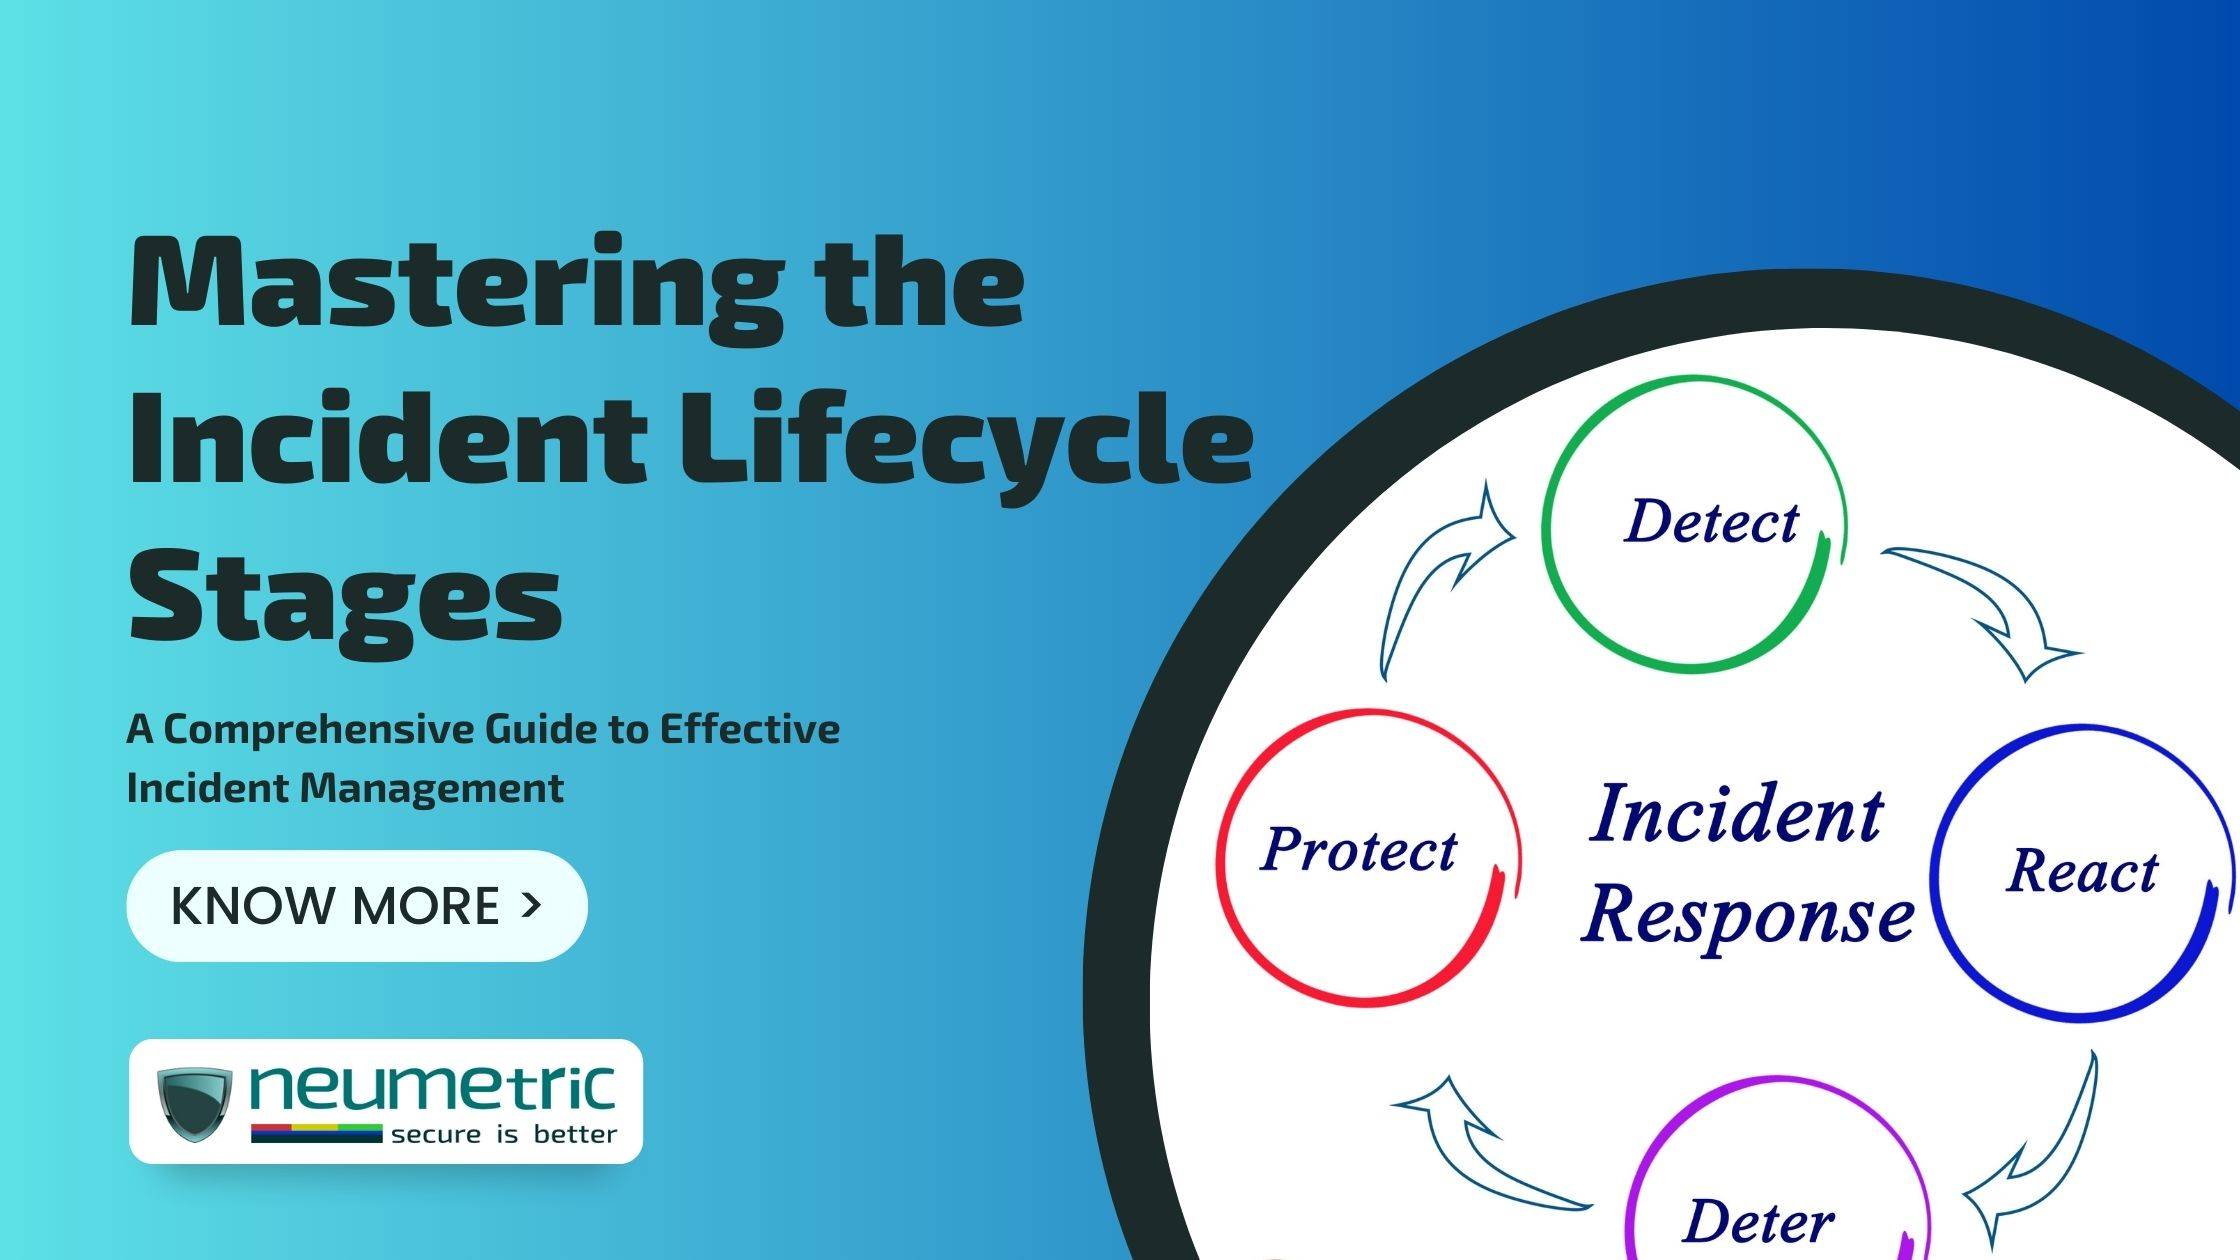 Mastering the Incident Lifecycle Stages: A Comprehensive Guide